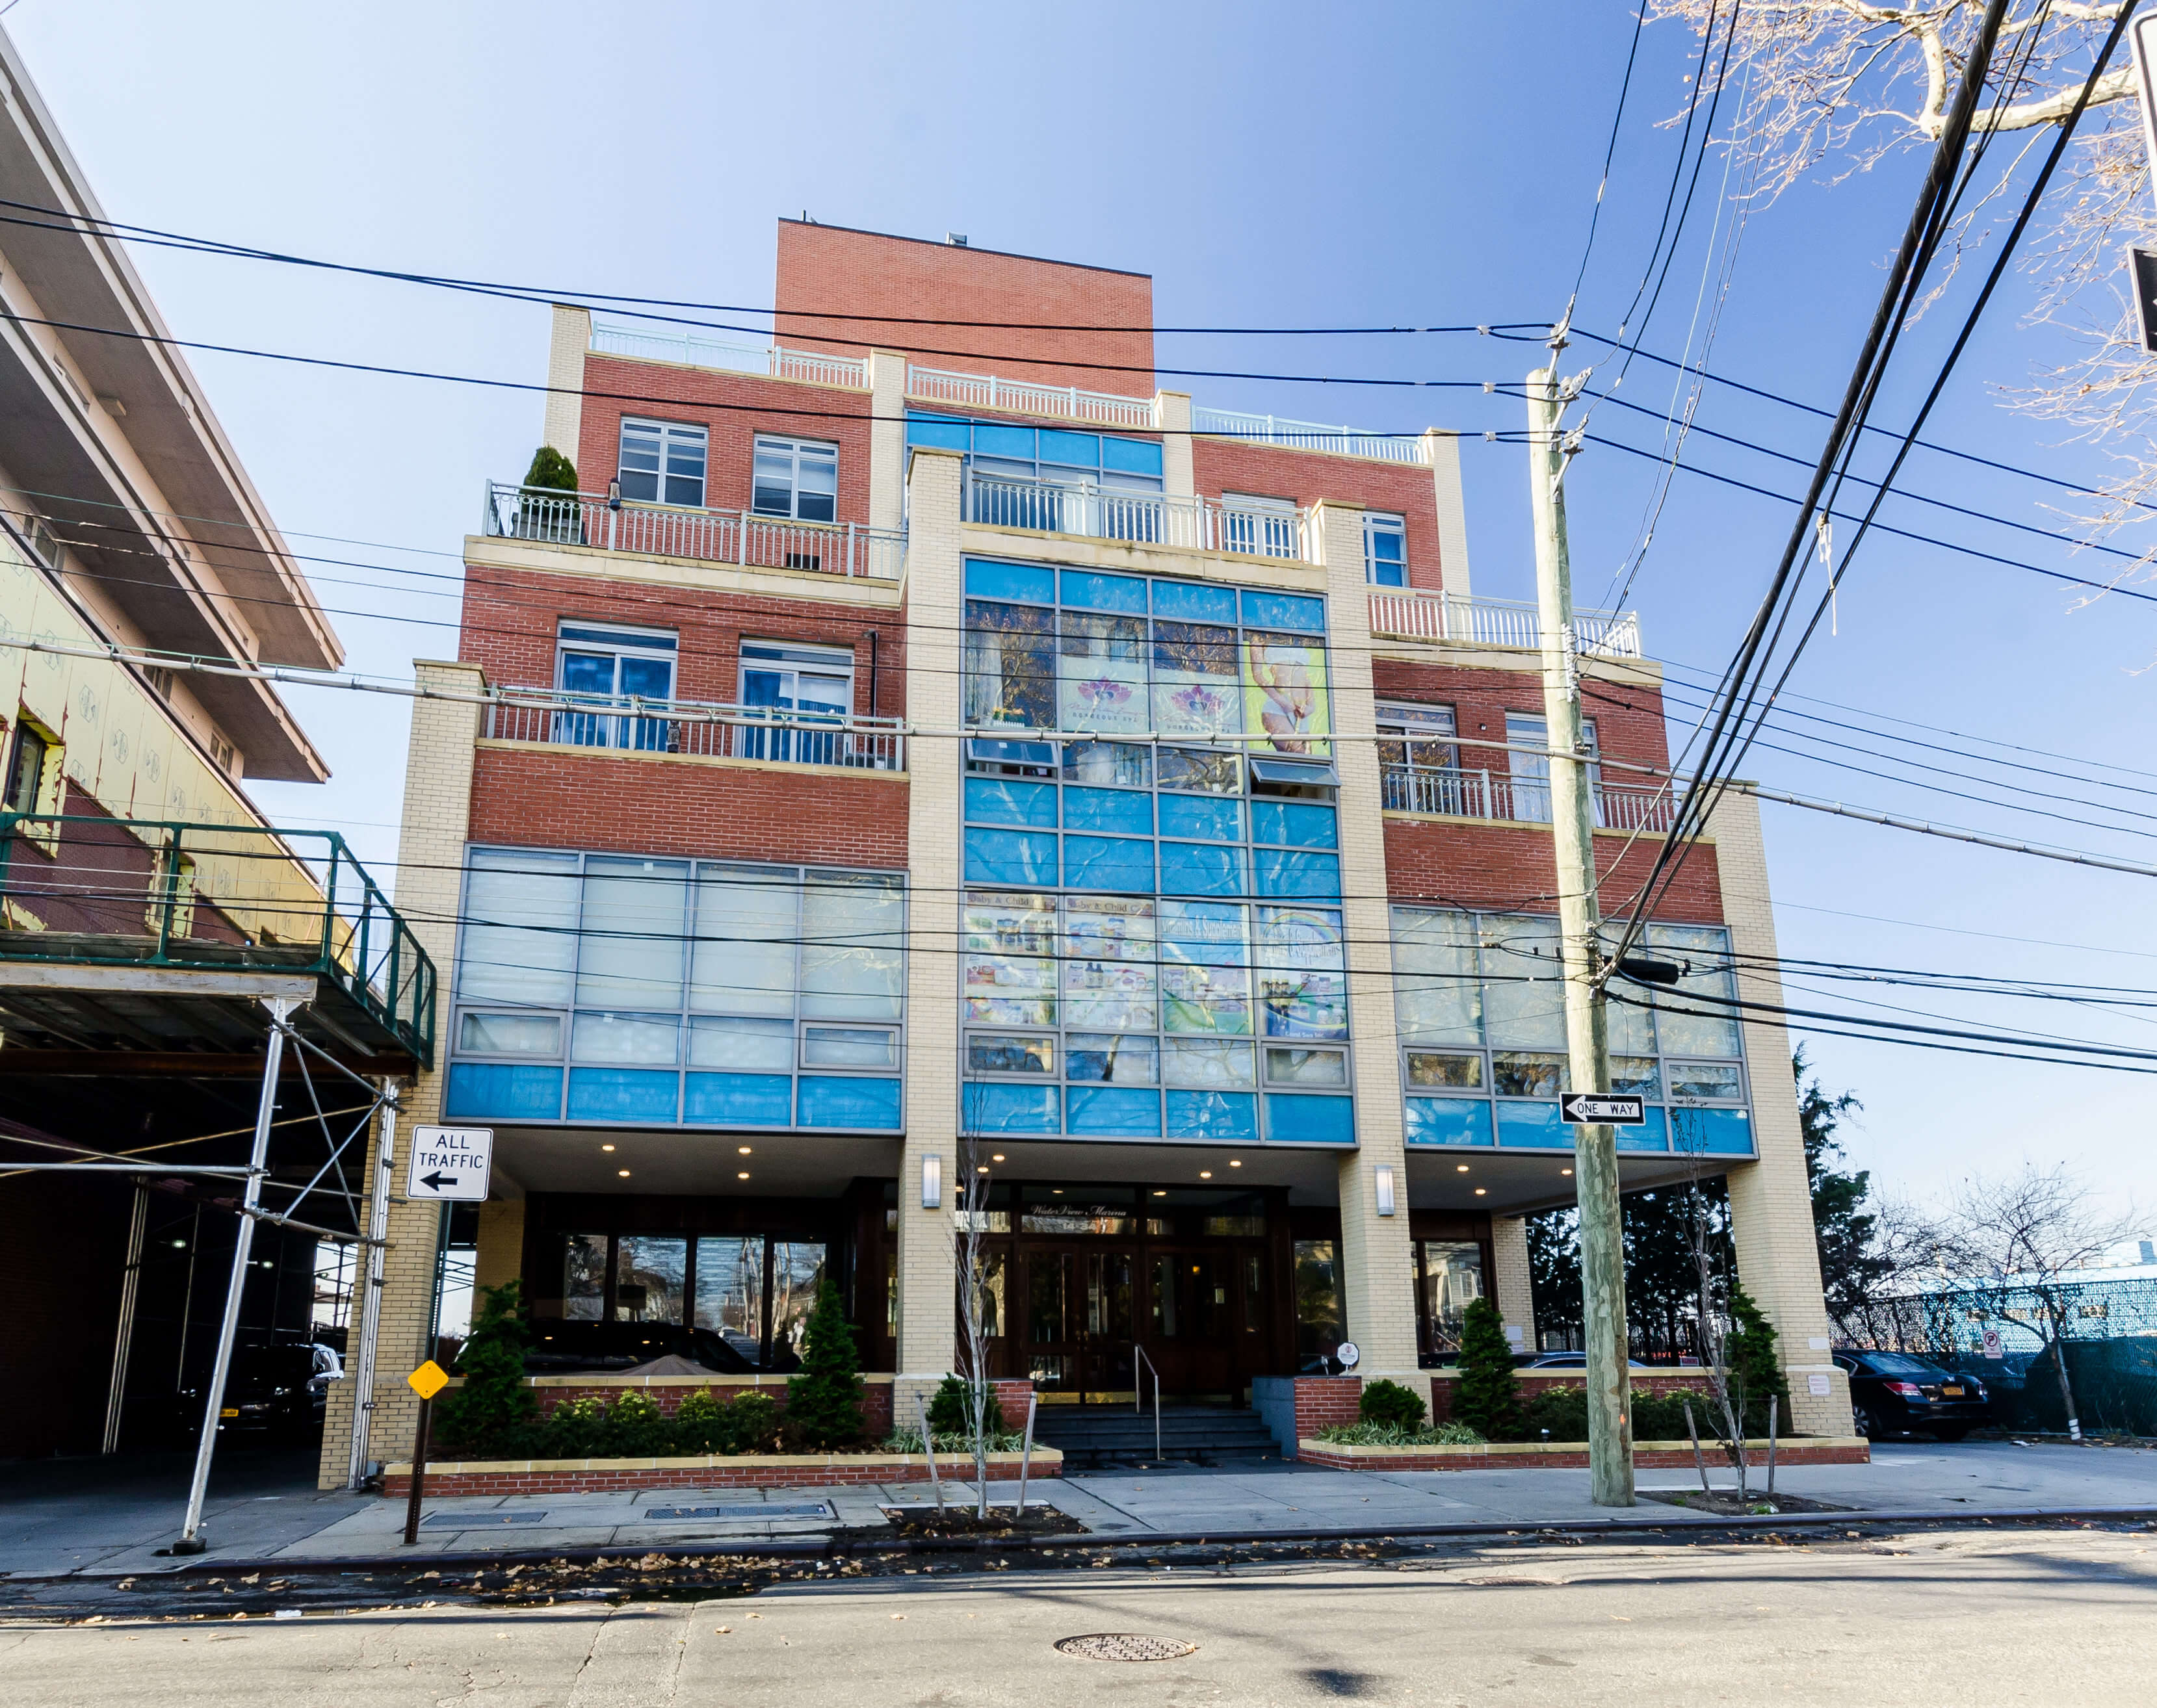 This building on 110th Street in College Point is up for sale at a $19.5 million pricetag.